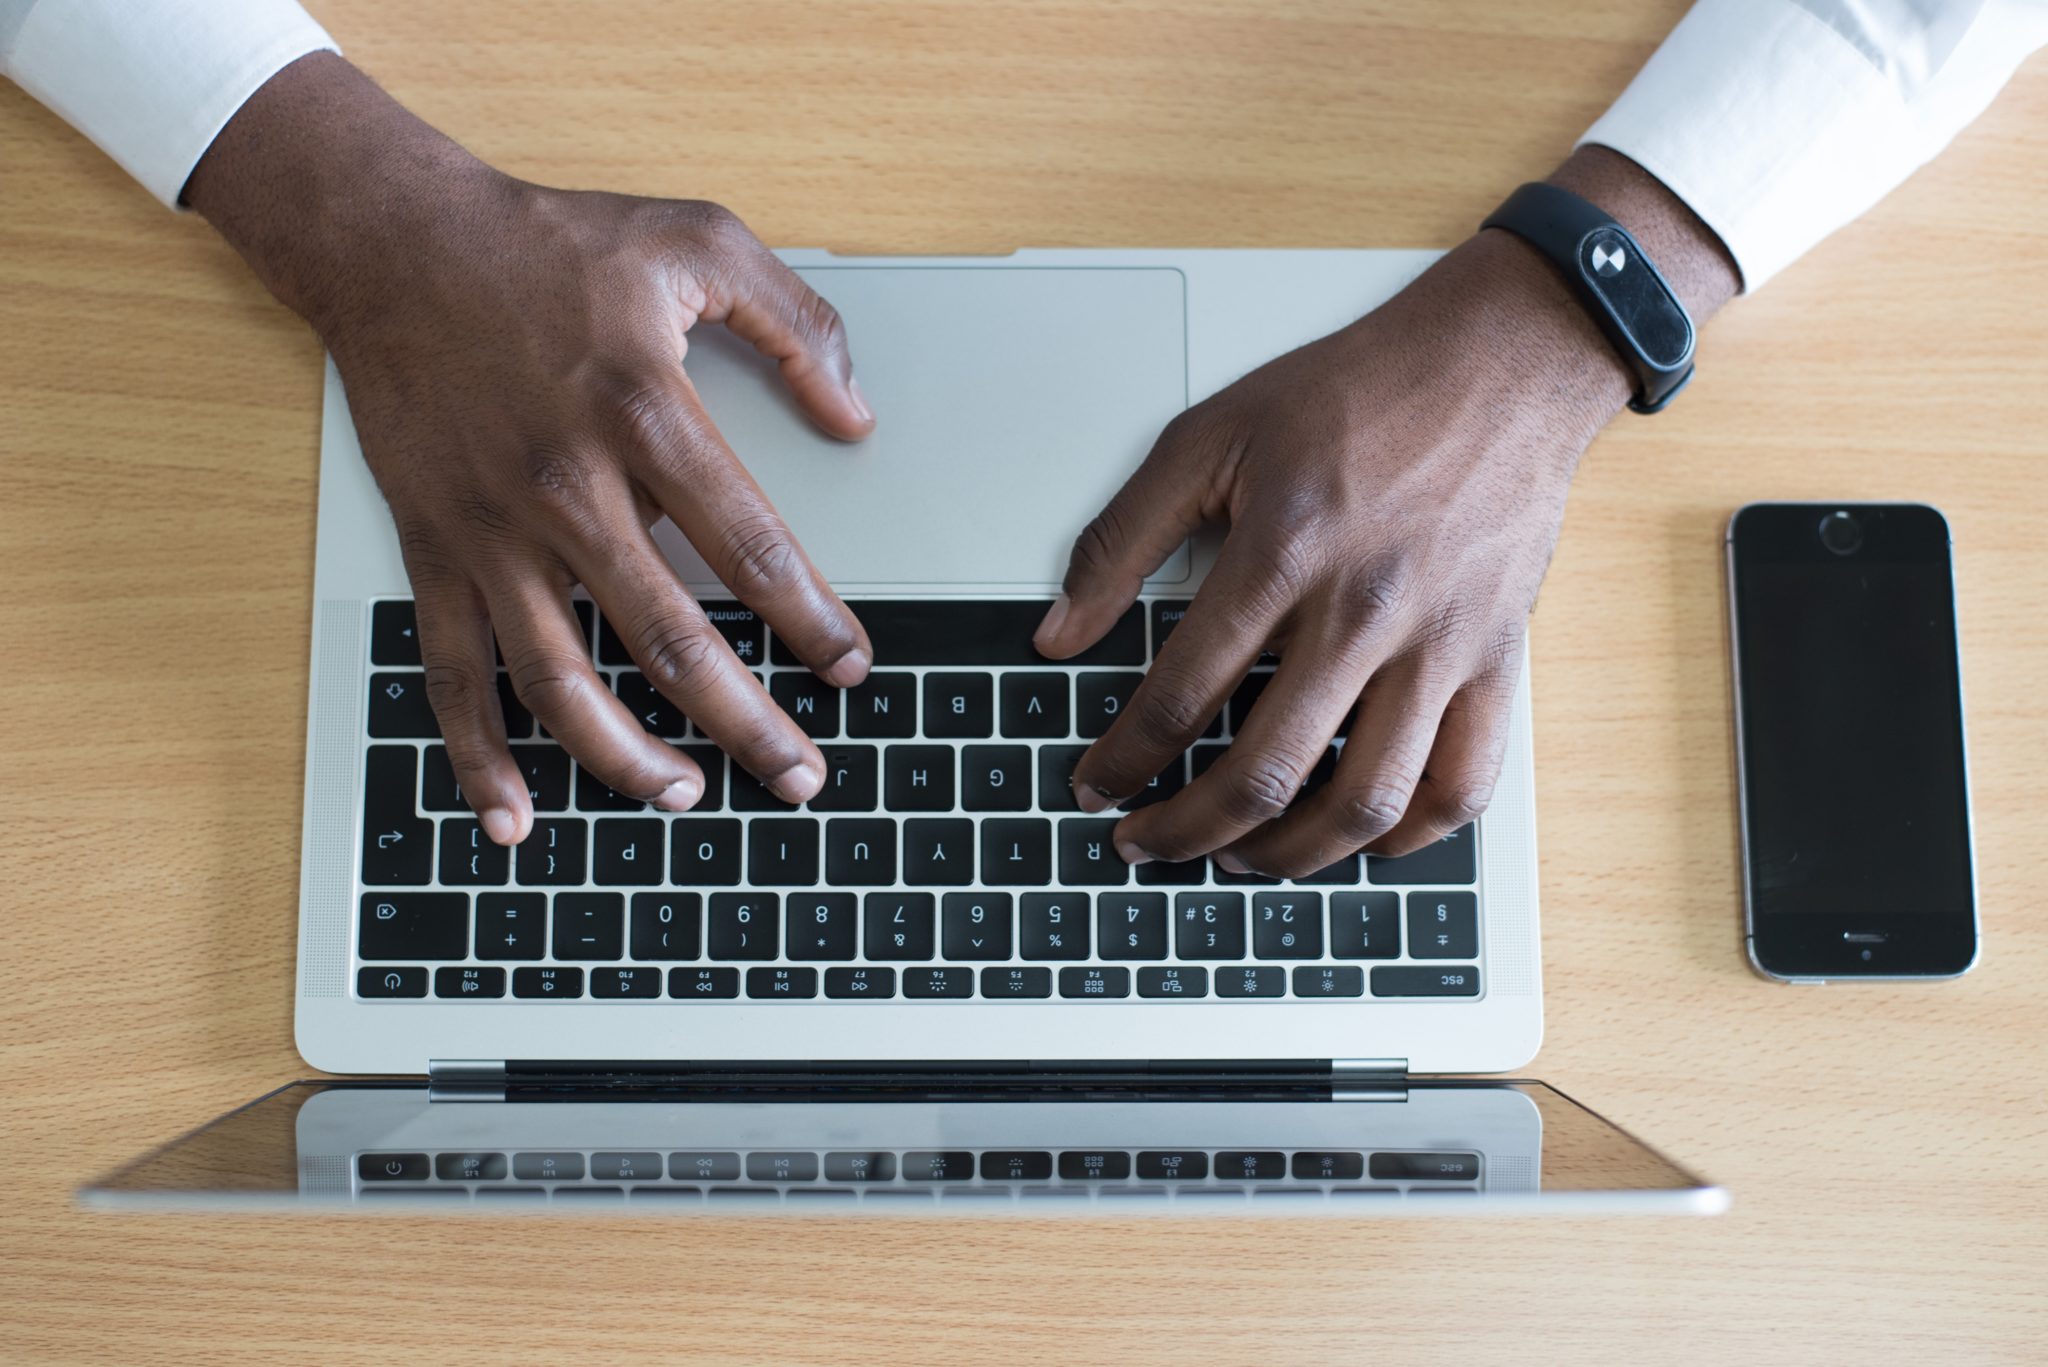 Photo of hands typing on a laptop keyboard